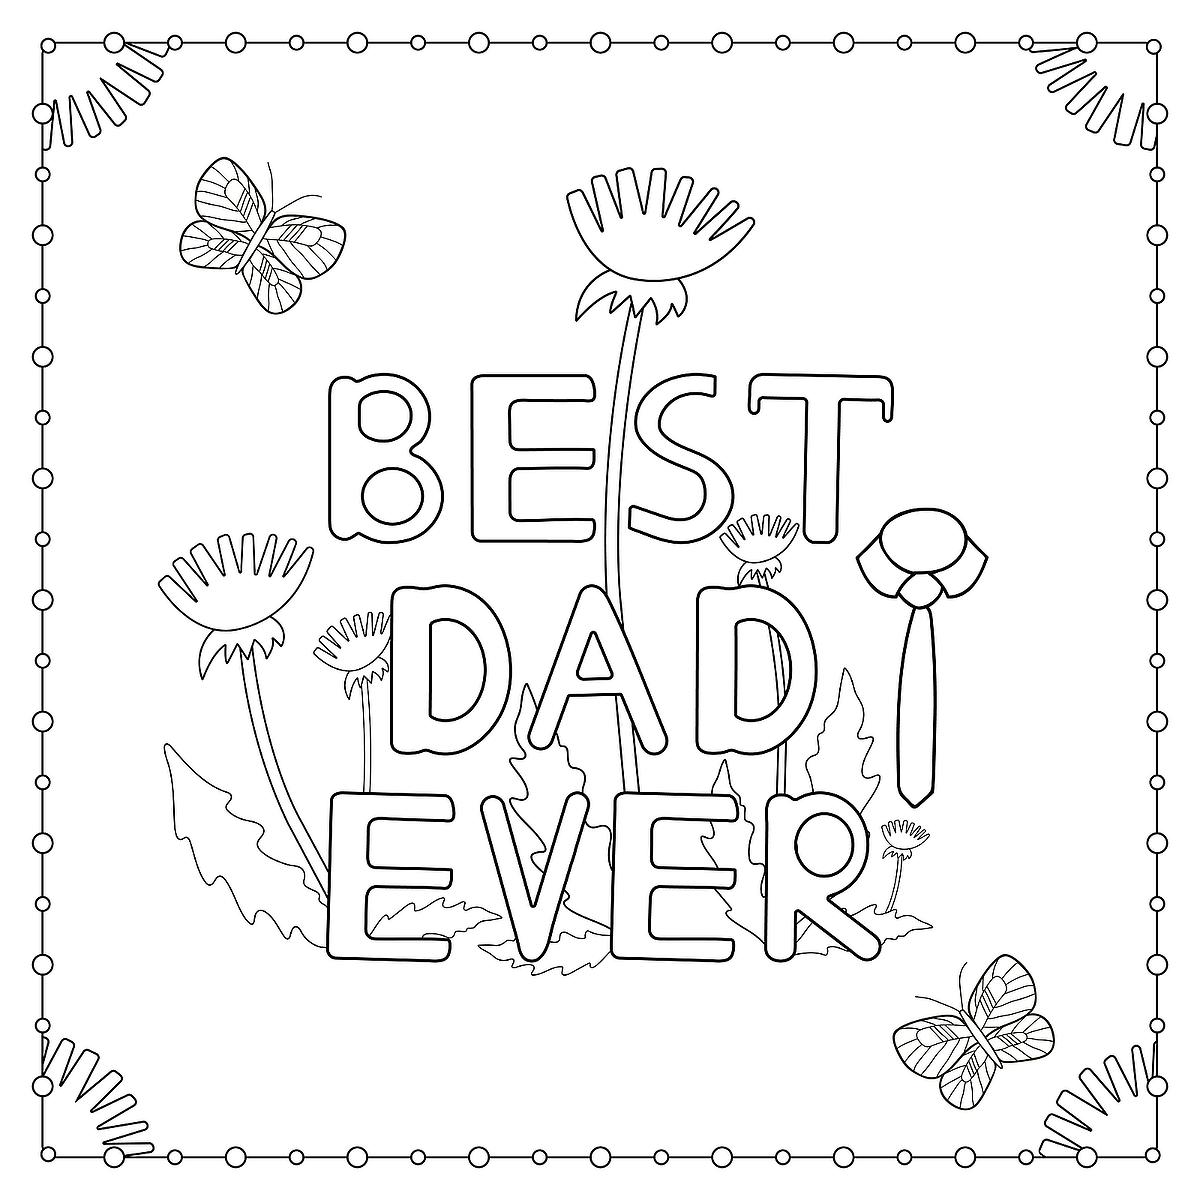 Fathers day coloring pages free printable activity pages to color for that special dad printables mom